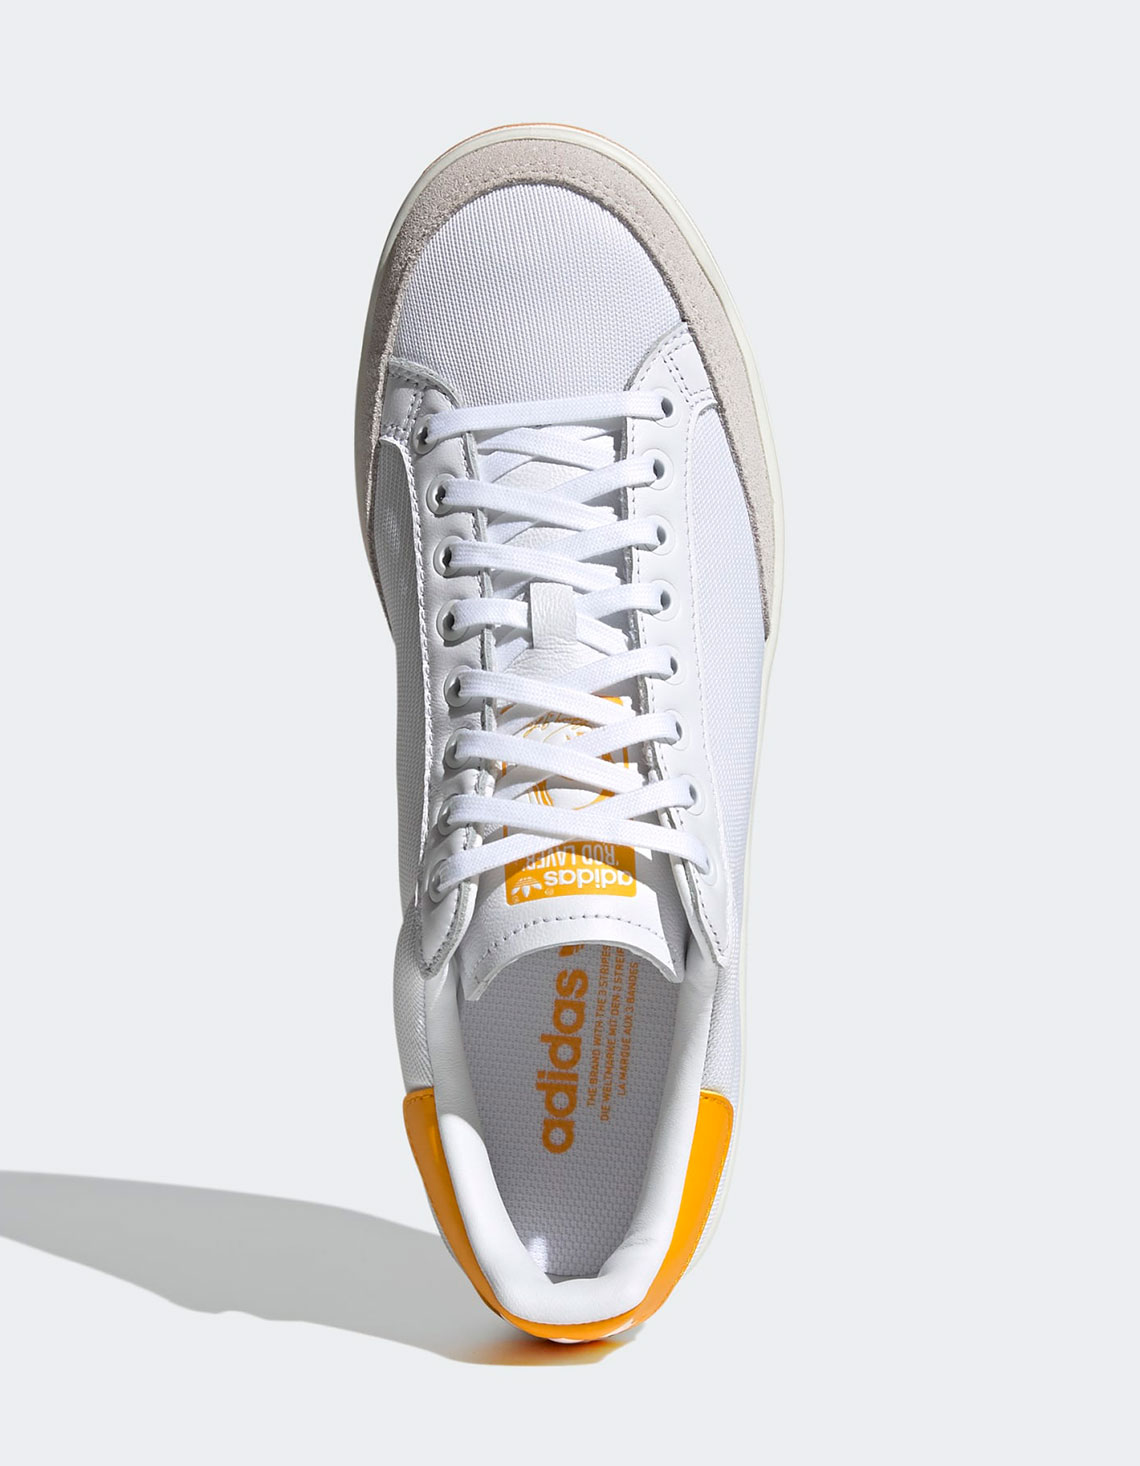 Adidas Rod Laver Cloud buty Team Collegiate Gold Off buty Fy4731 2